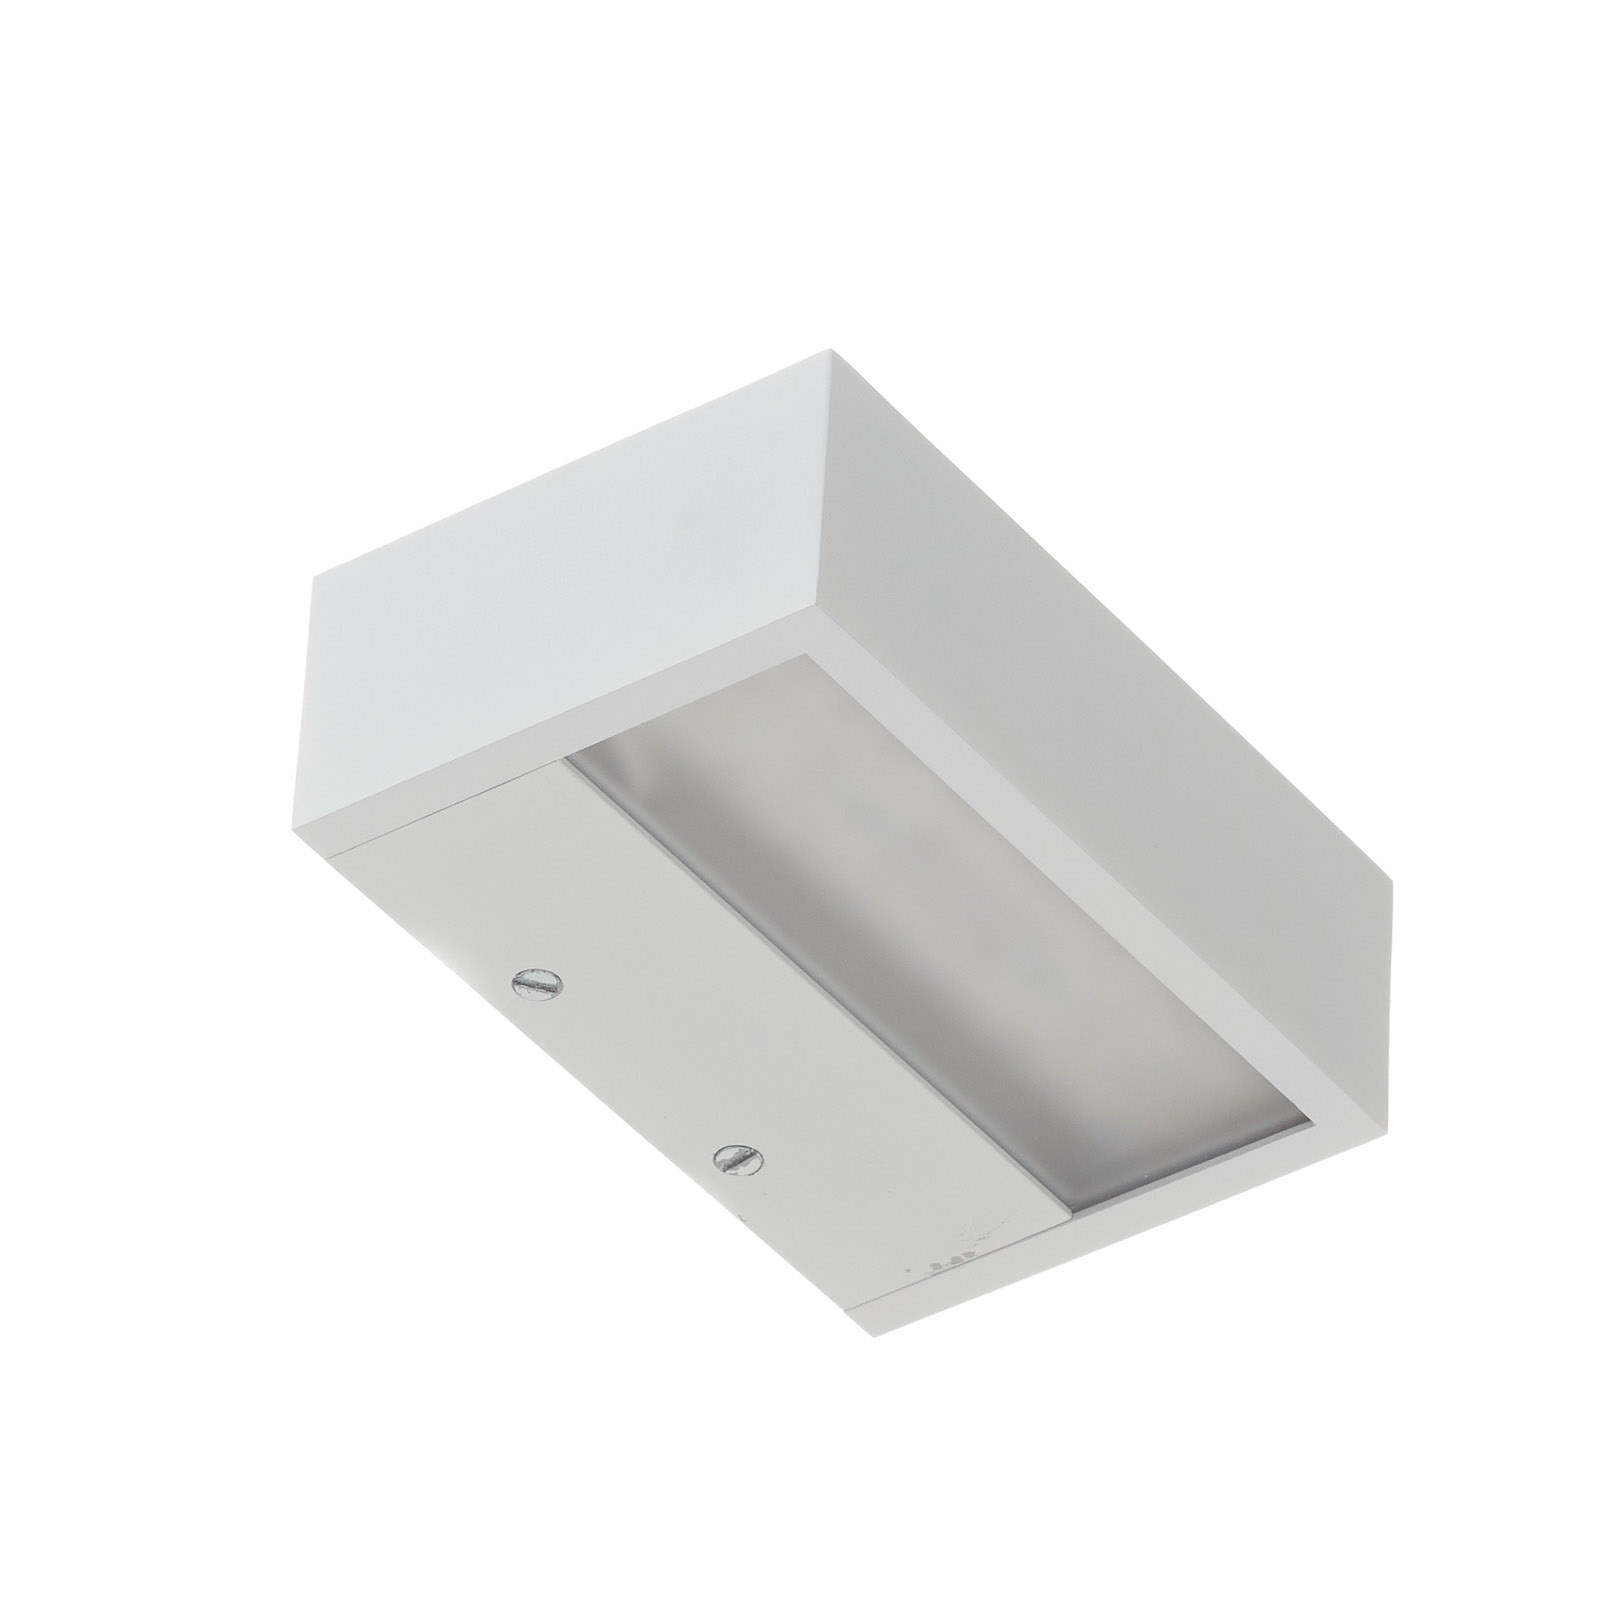 Decor Walther Box LED wall lamp white 2,700K 15cm